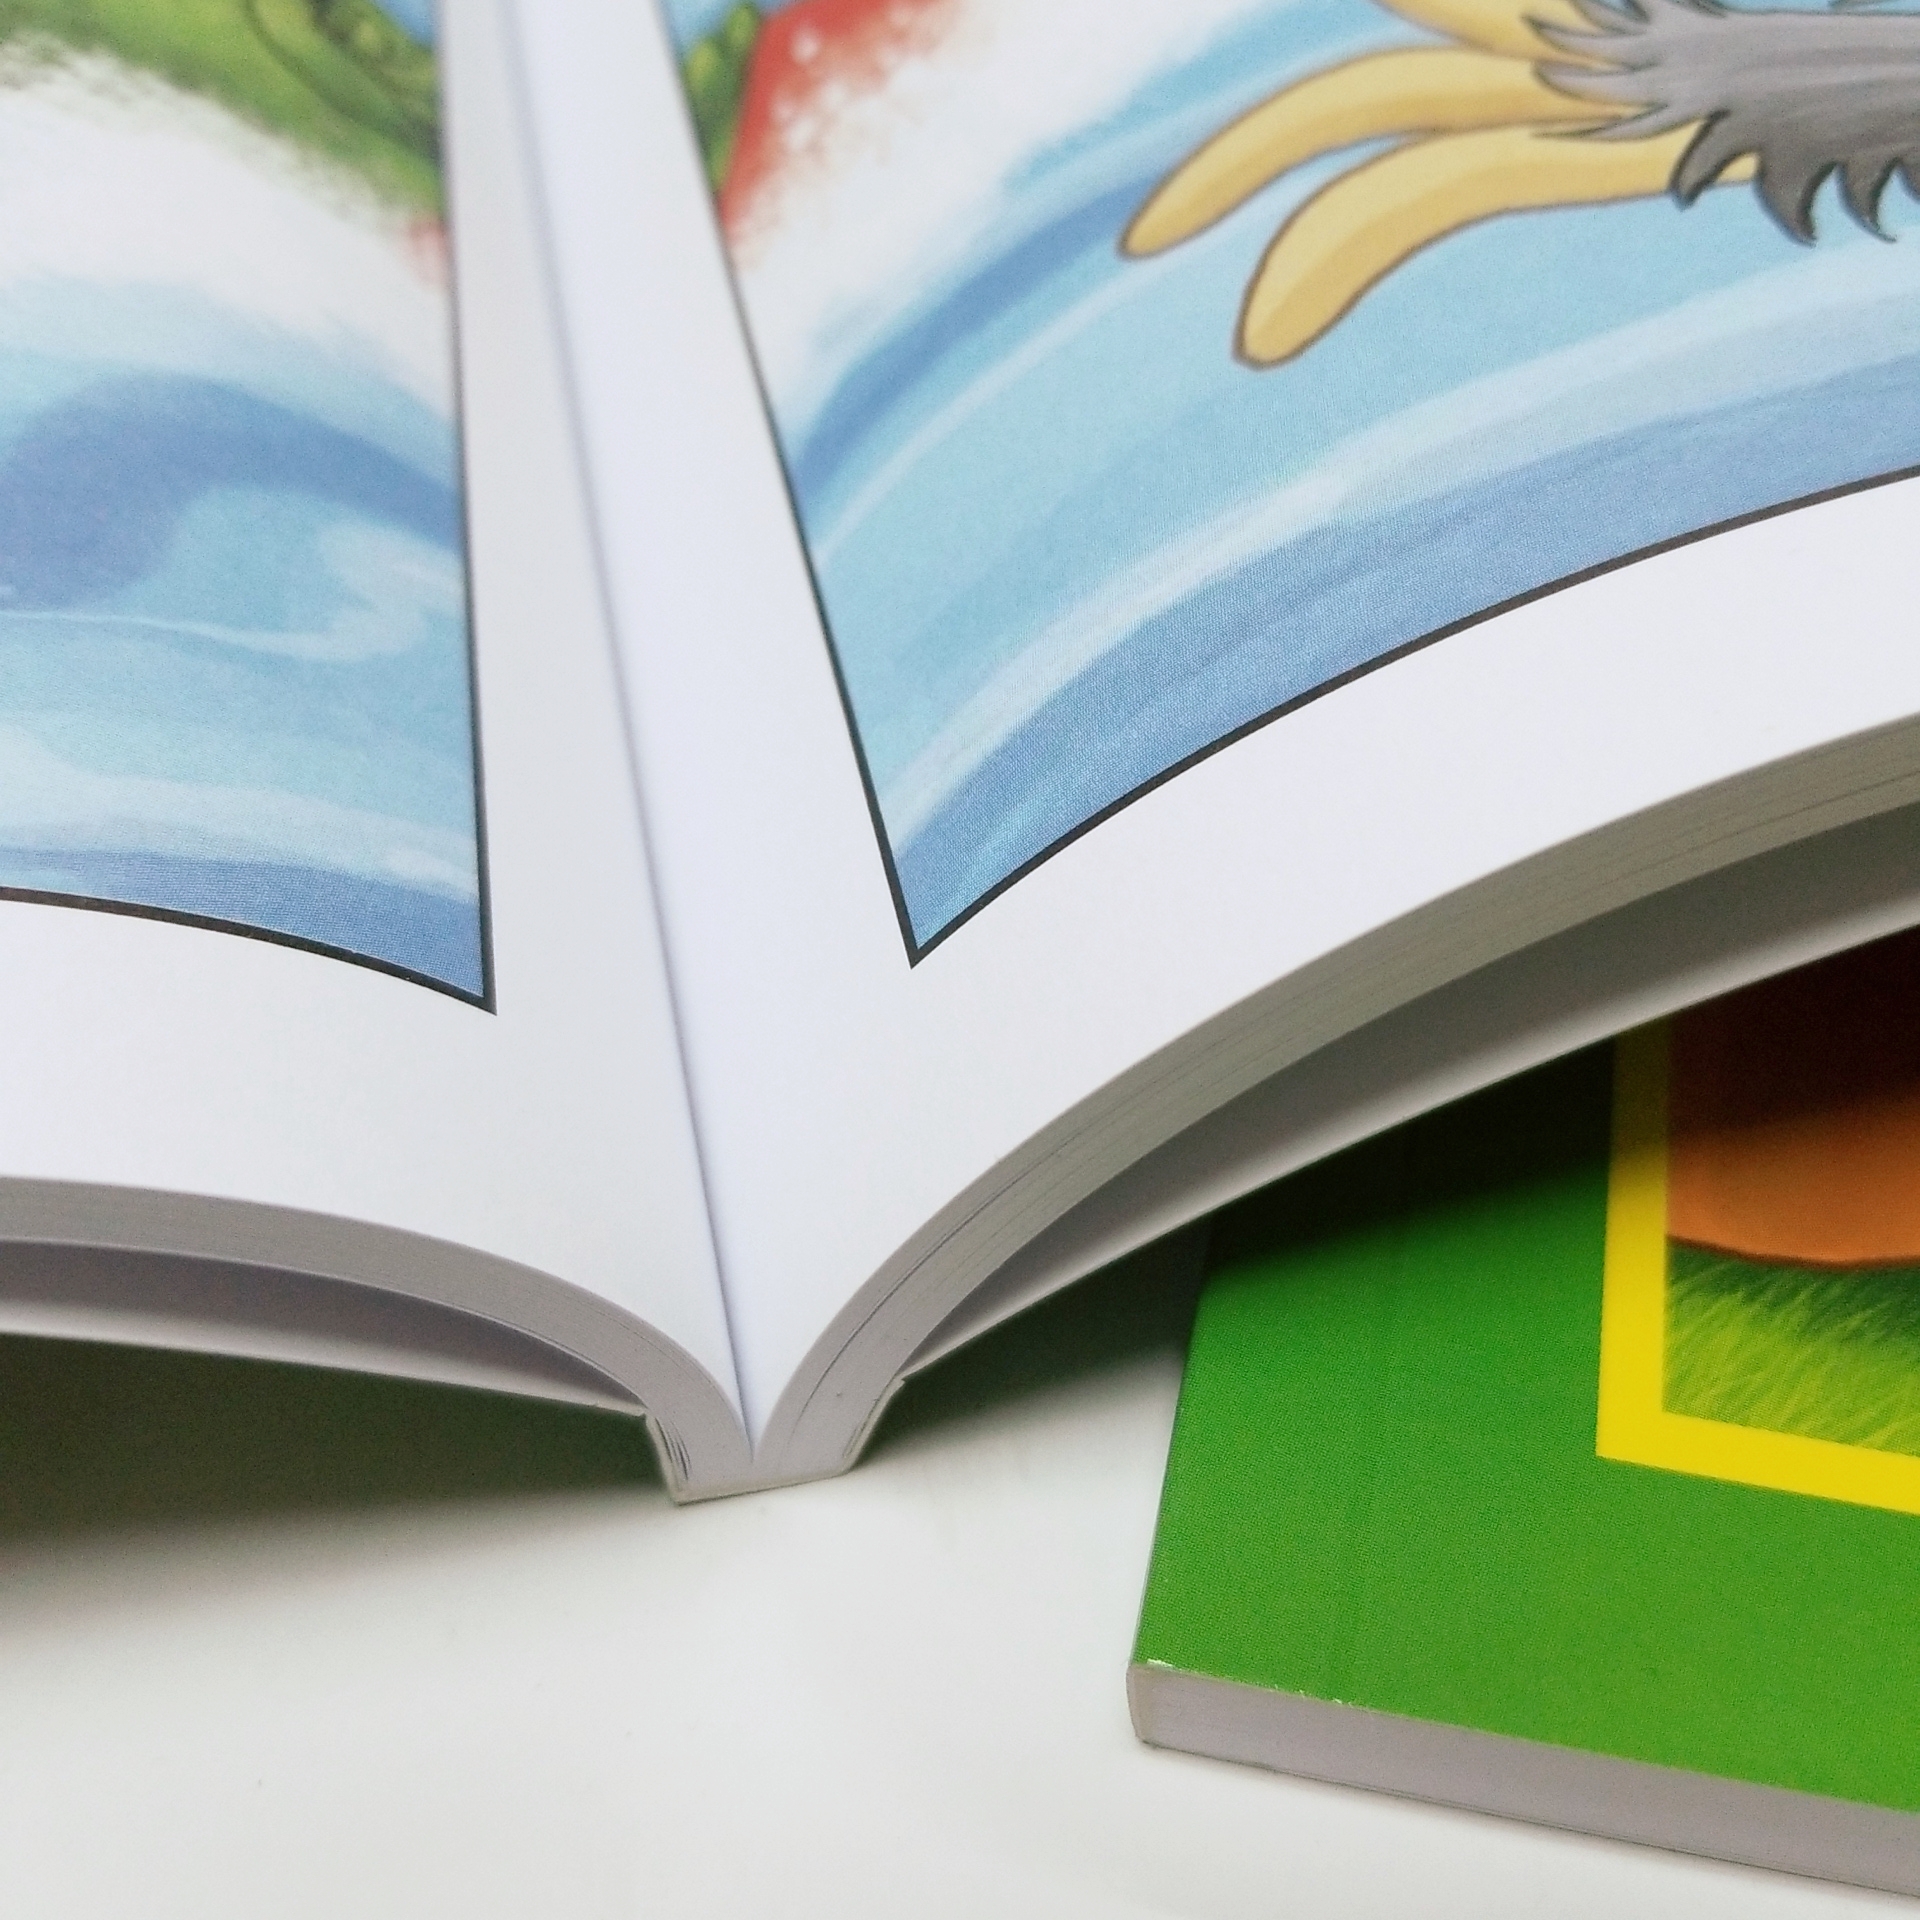 The standard choice for most softcover books. This flexible, glued binding will stand the test of time.